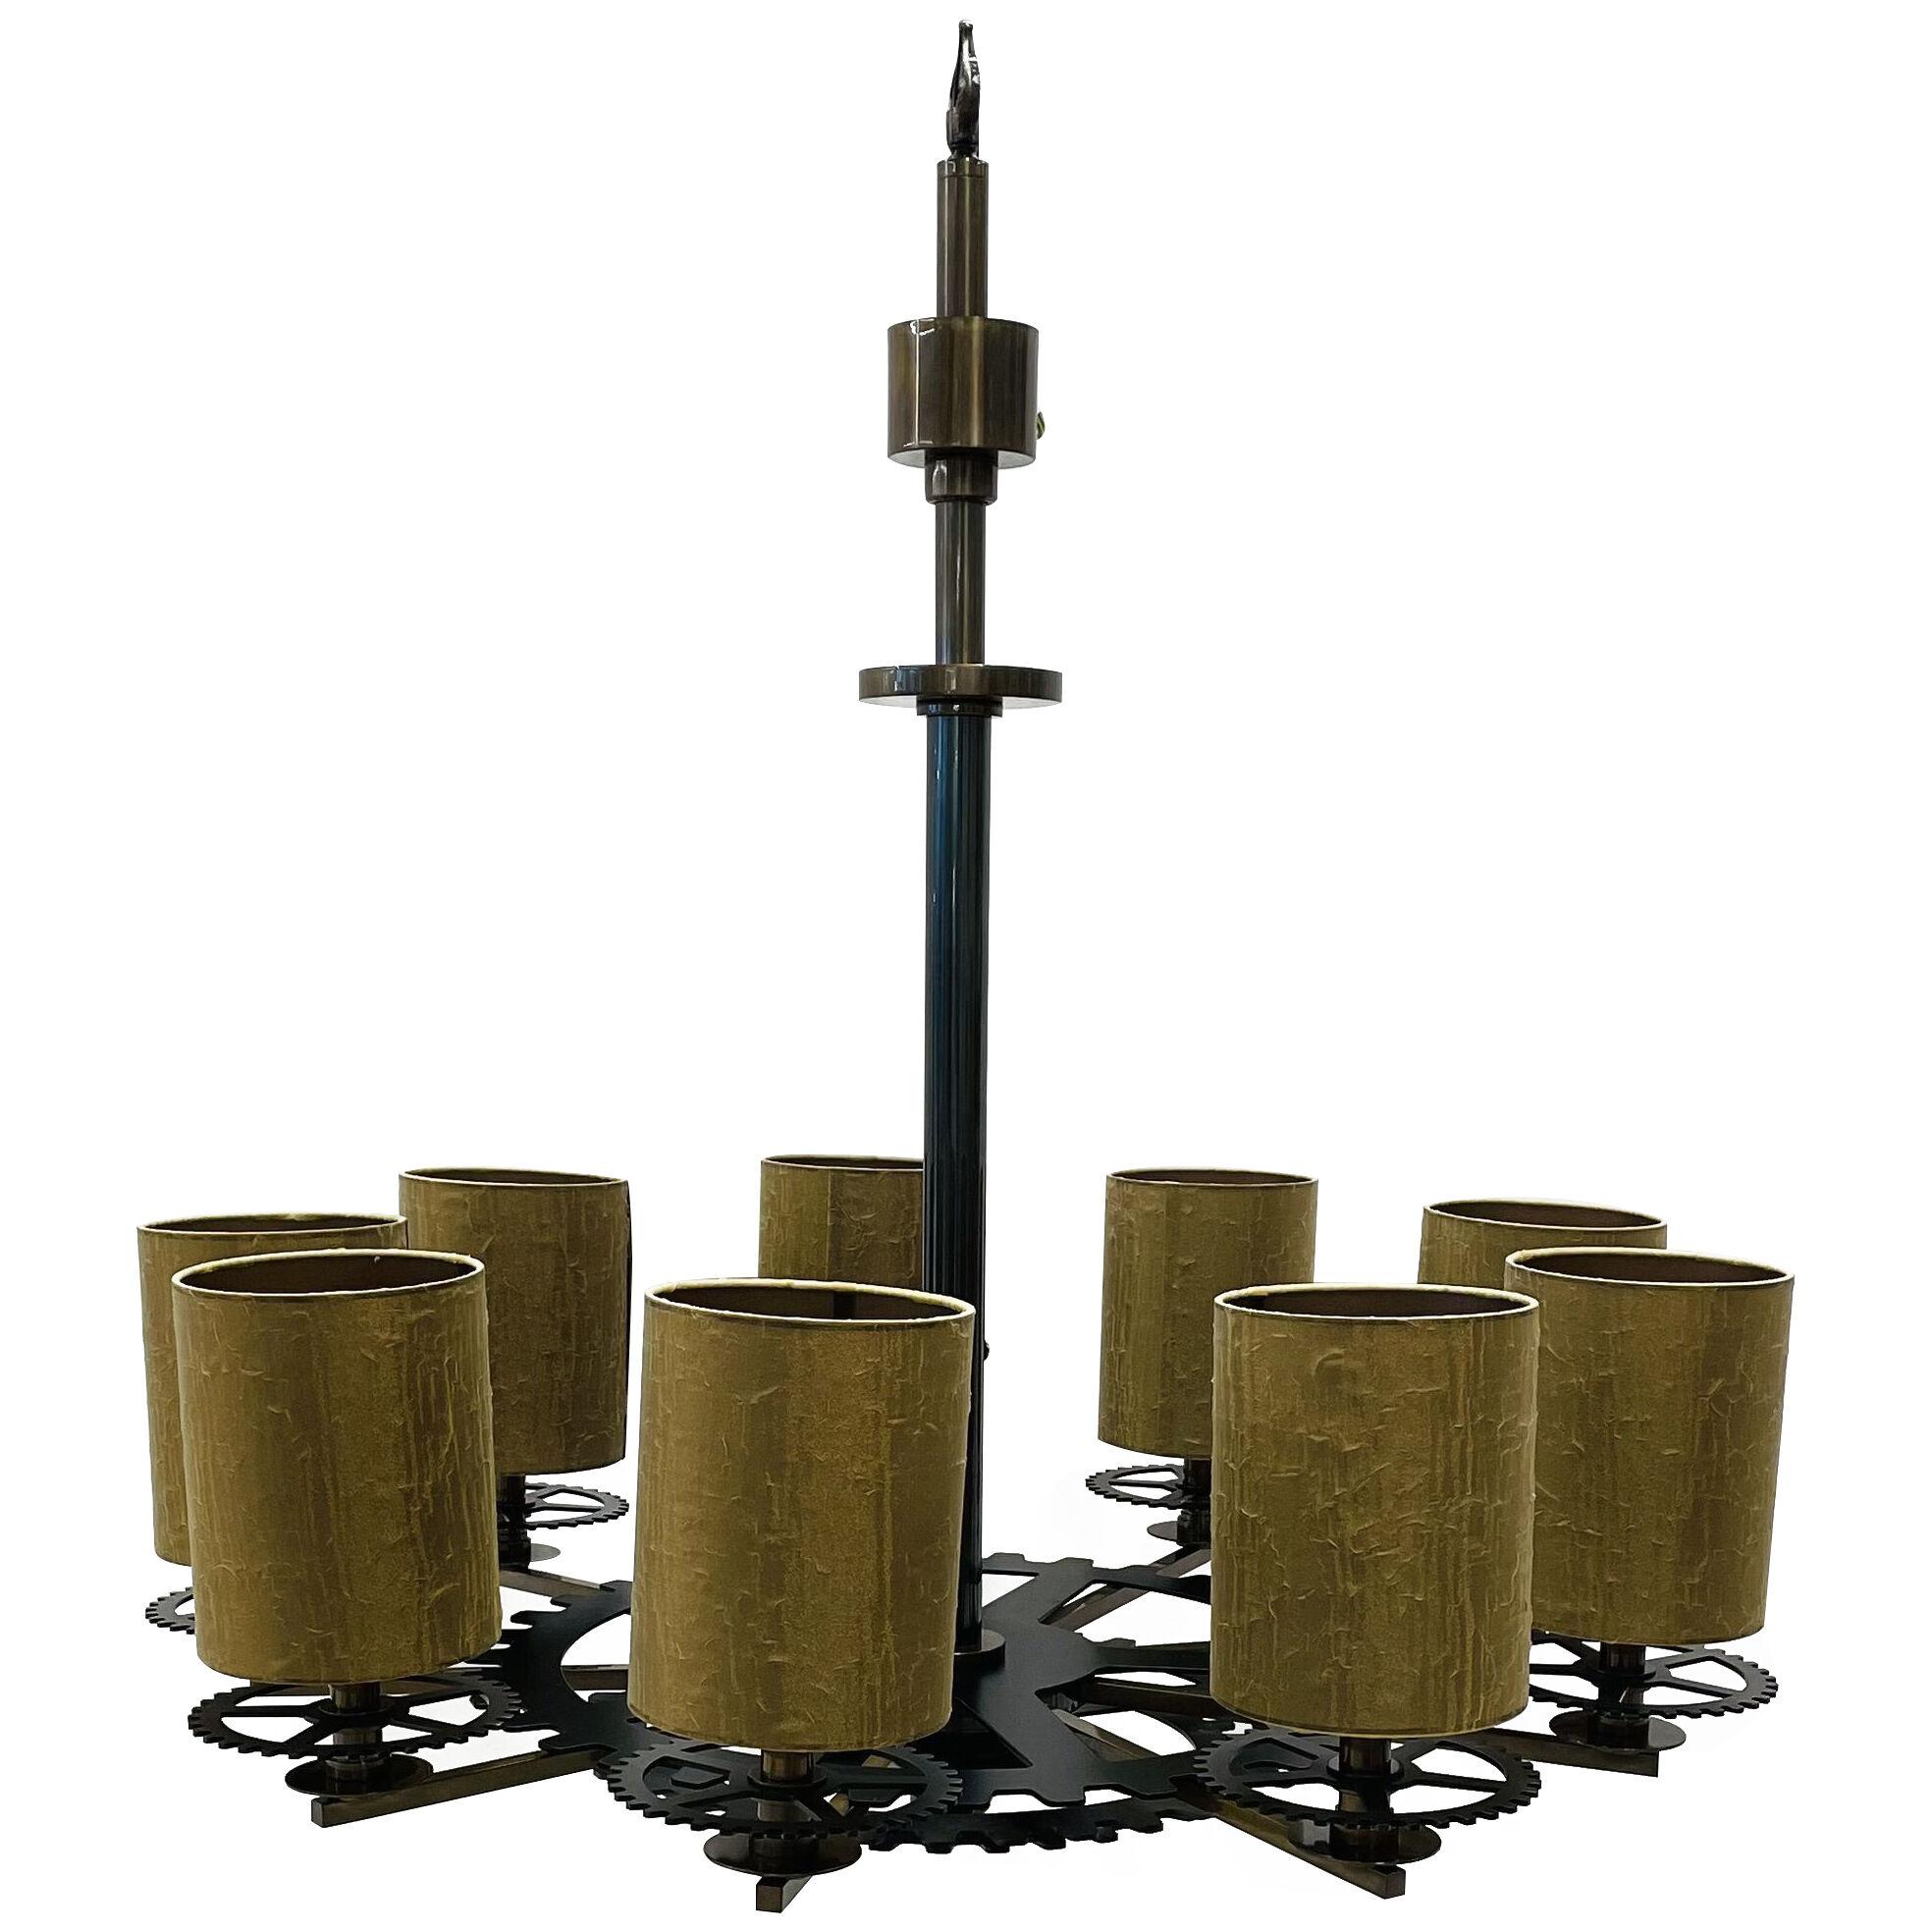 Modern Iron Chandelier Depicting Gears by Sigma L2, Brass, Contemporary, Italy